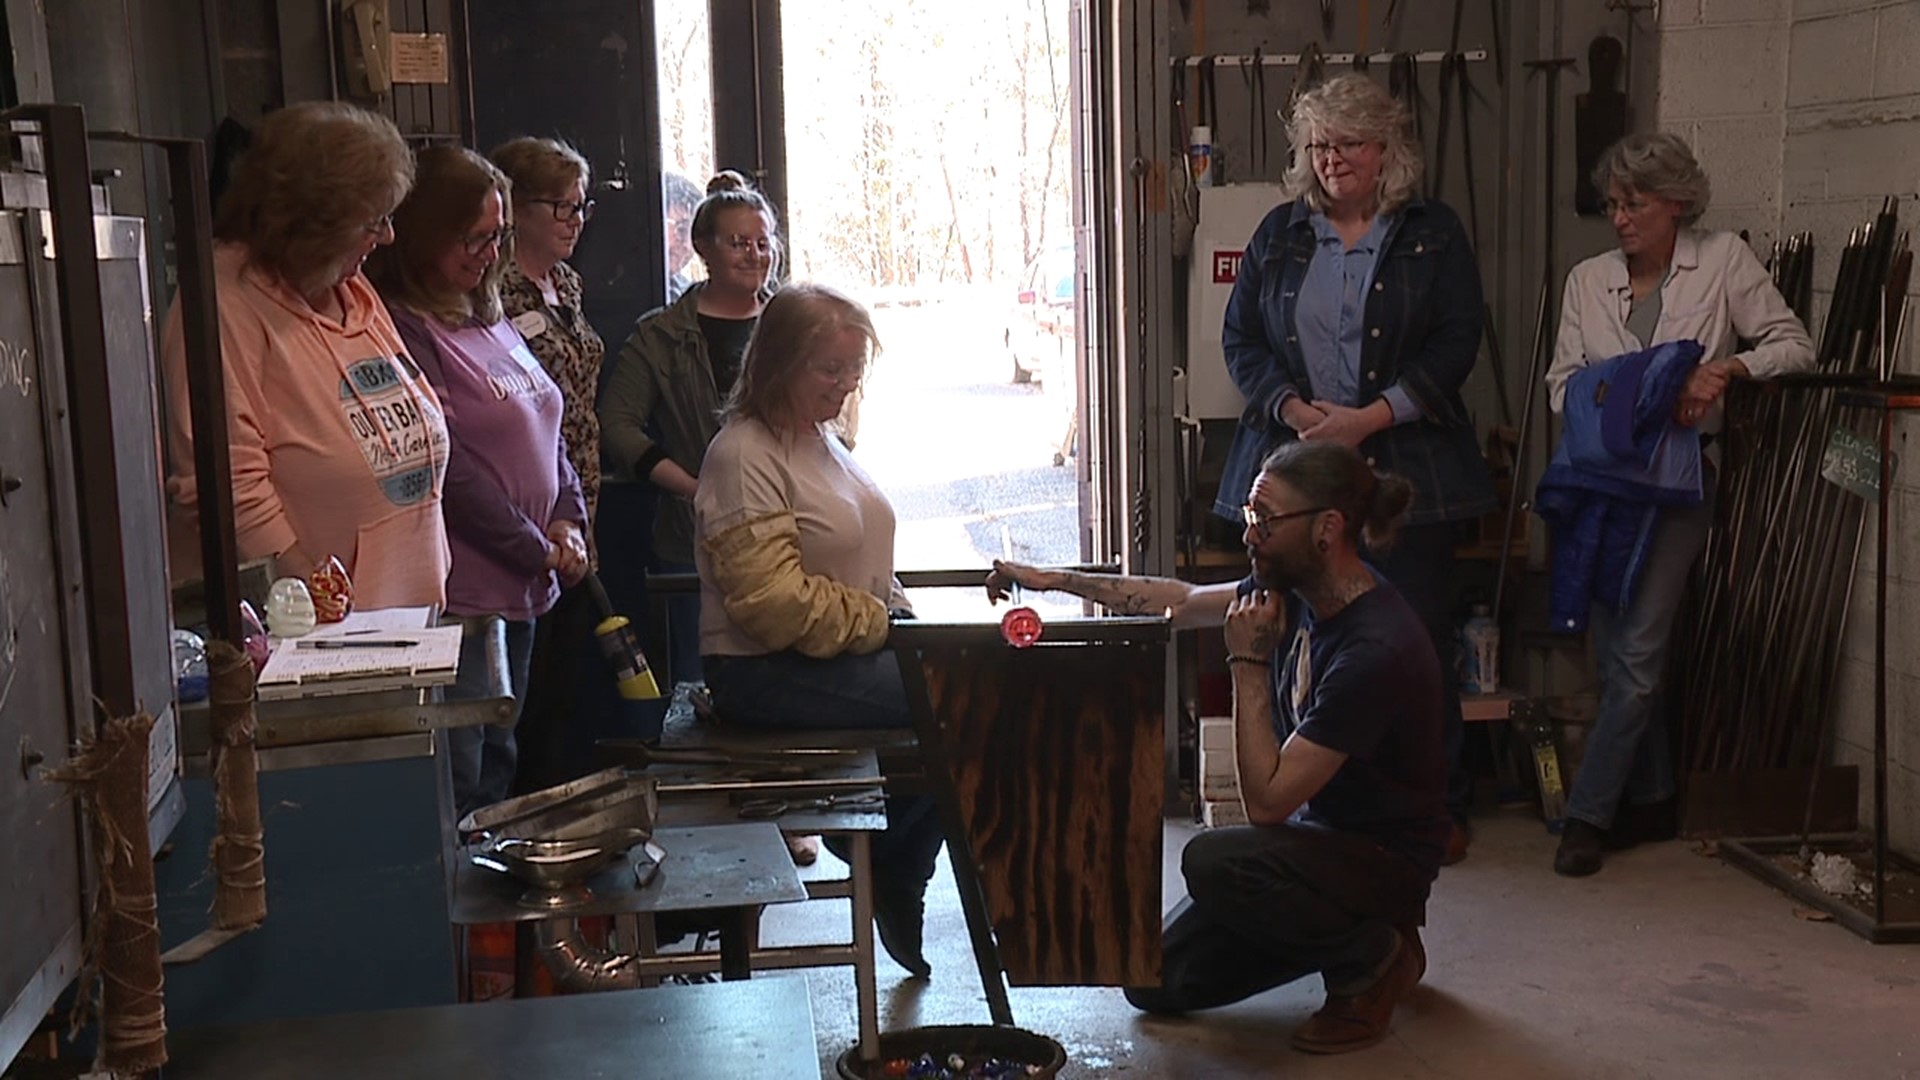 A special glass-blowing workshop at Keystone College Sunday gave people the opportunity to make one-of-a-kind sculptures ahead of Easter.